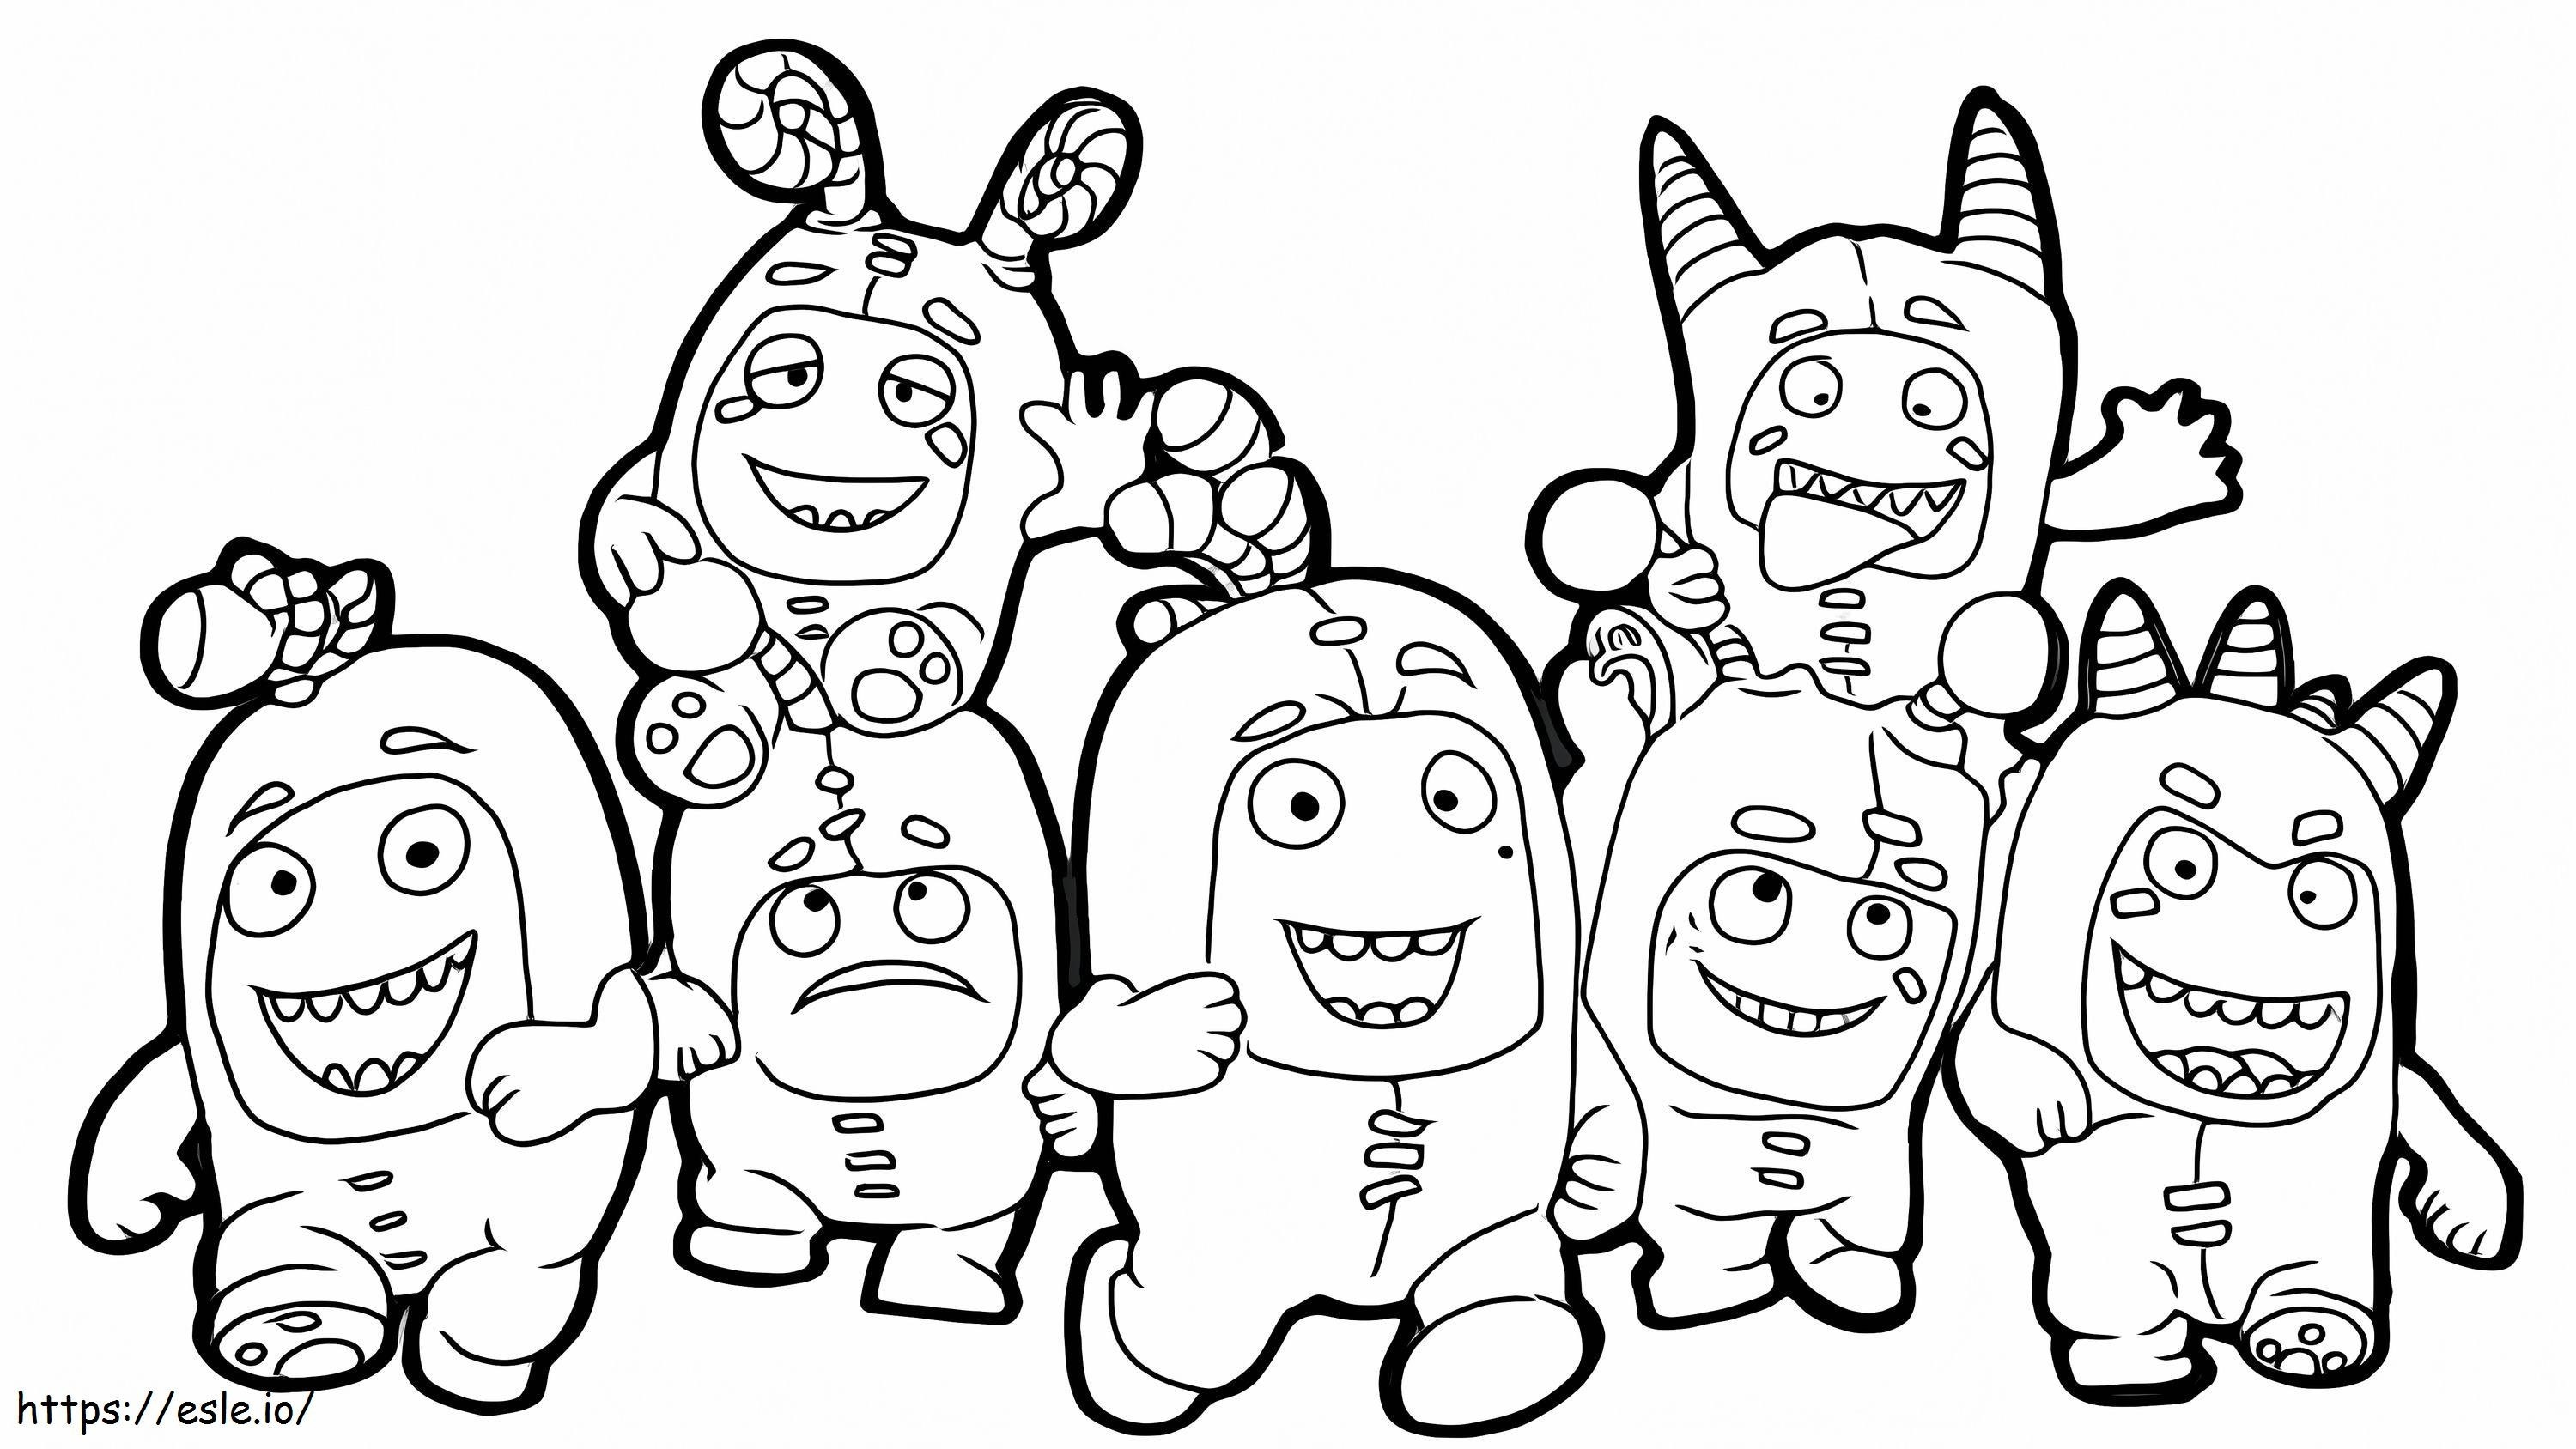 Happy Oddbods coloring page